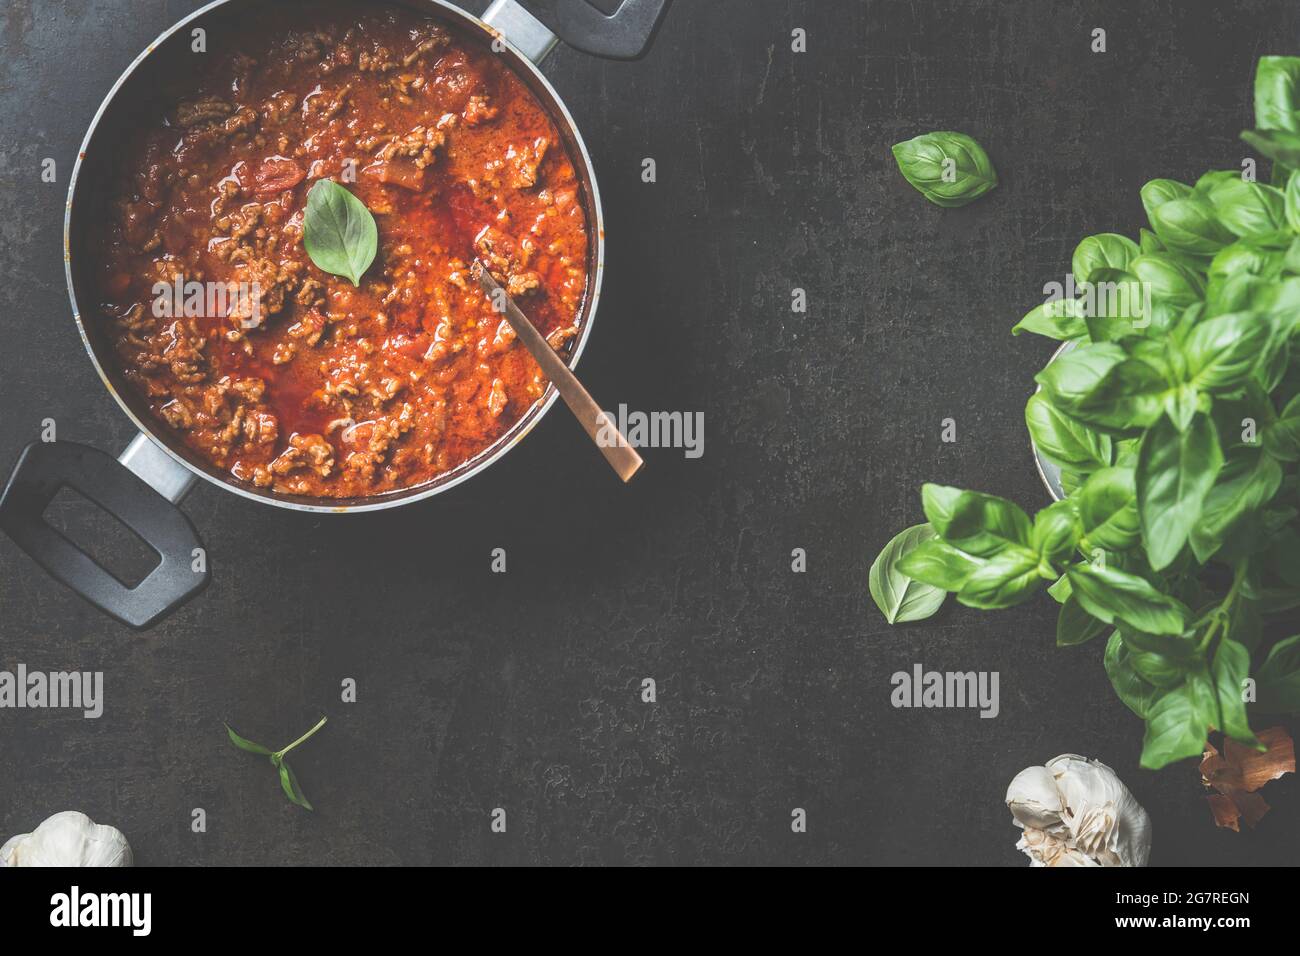 Food background with sauce bolognese in black cooking pot on dark background. Top view Stock Photo